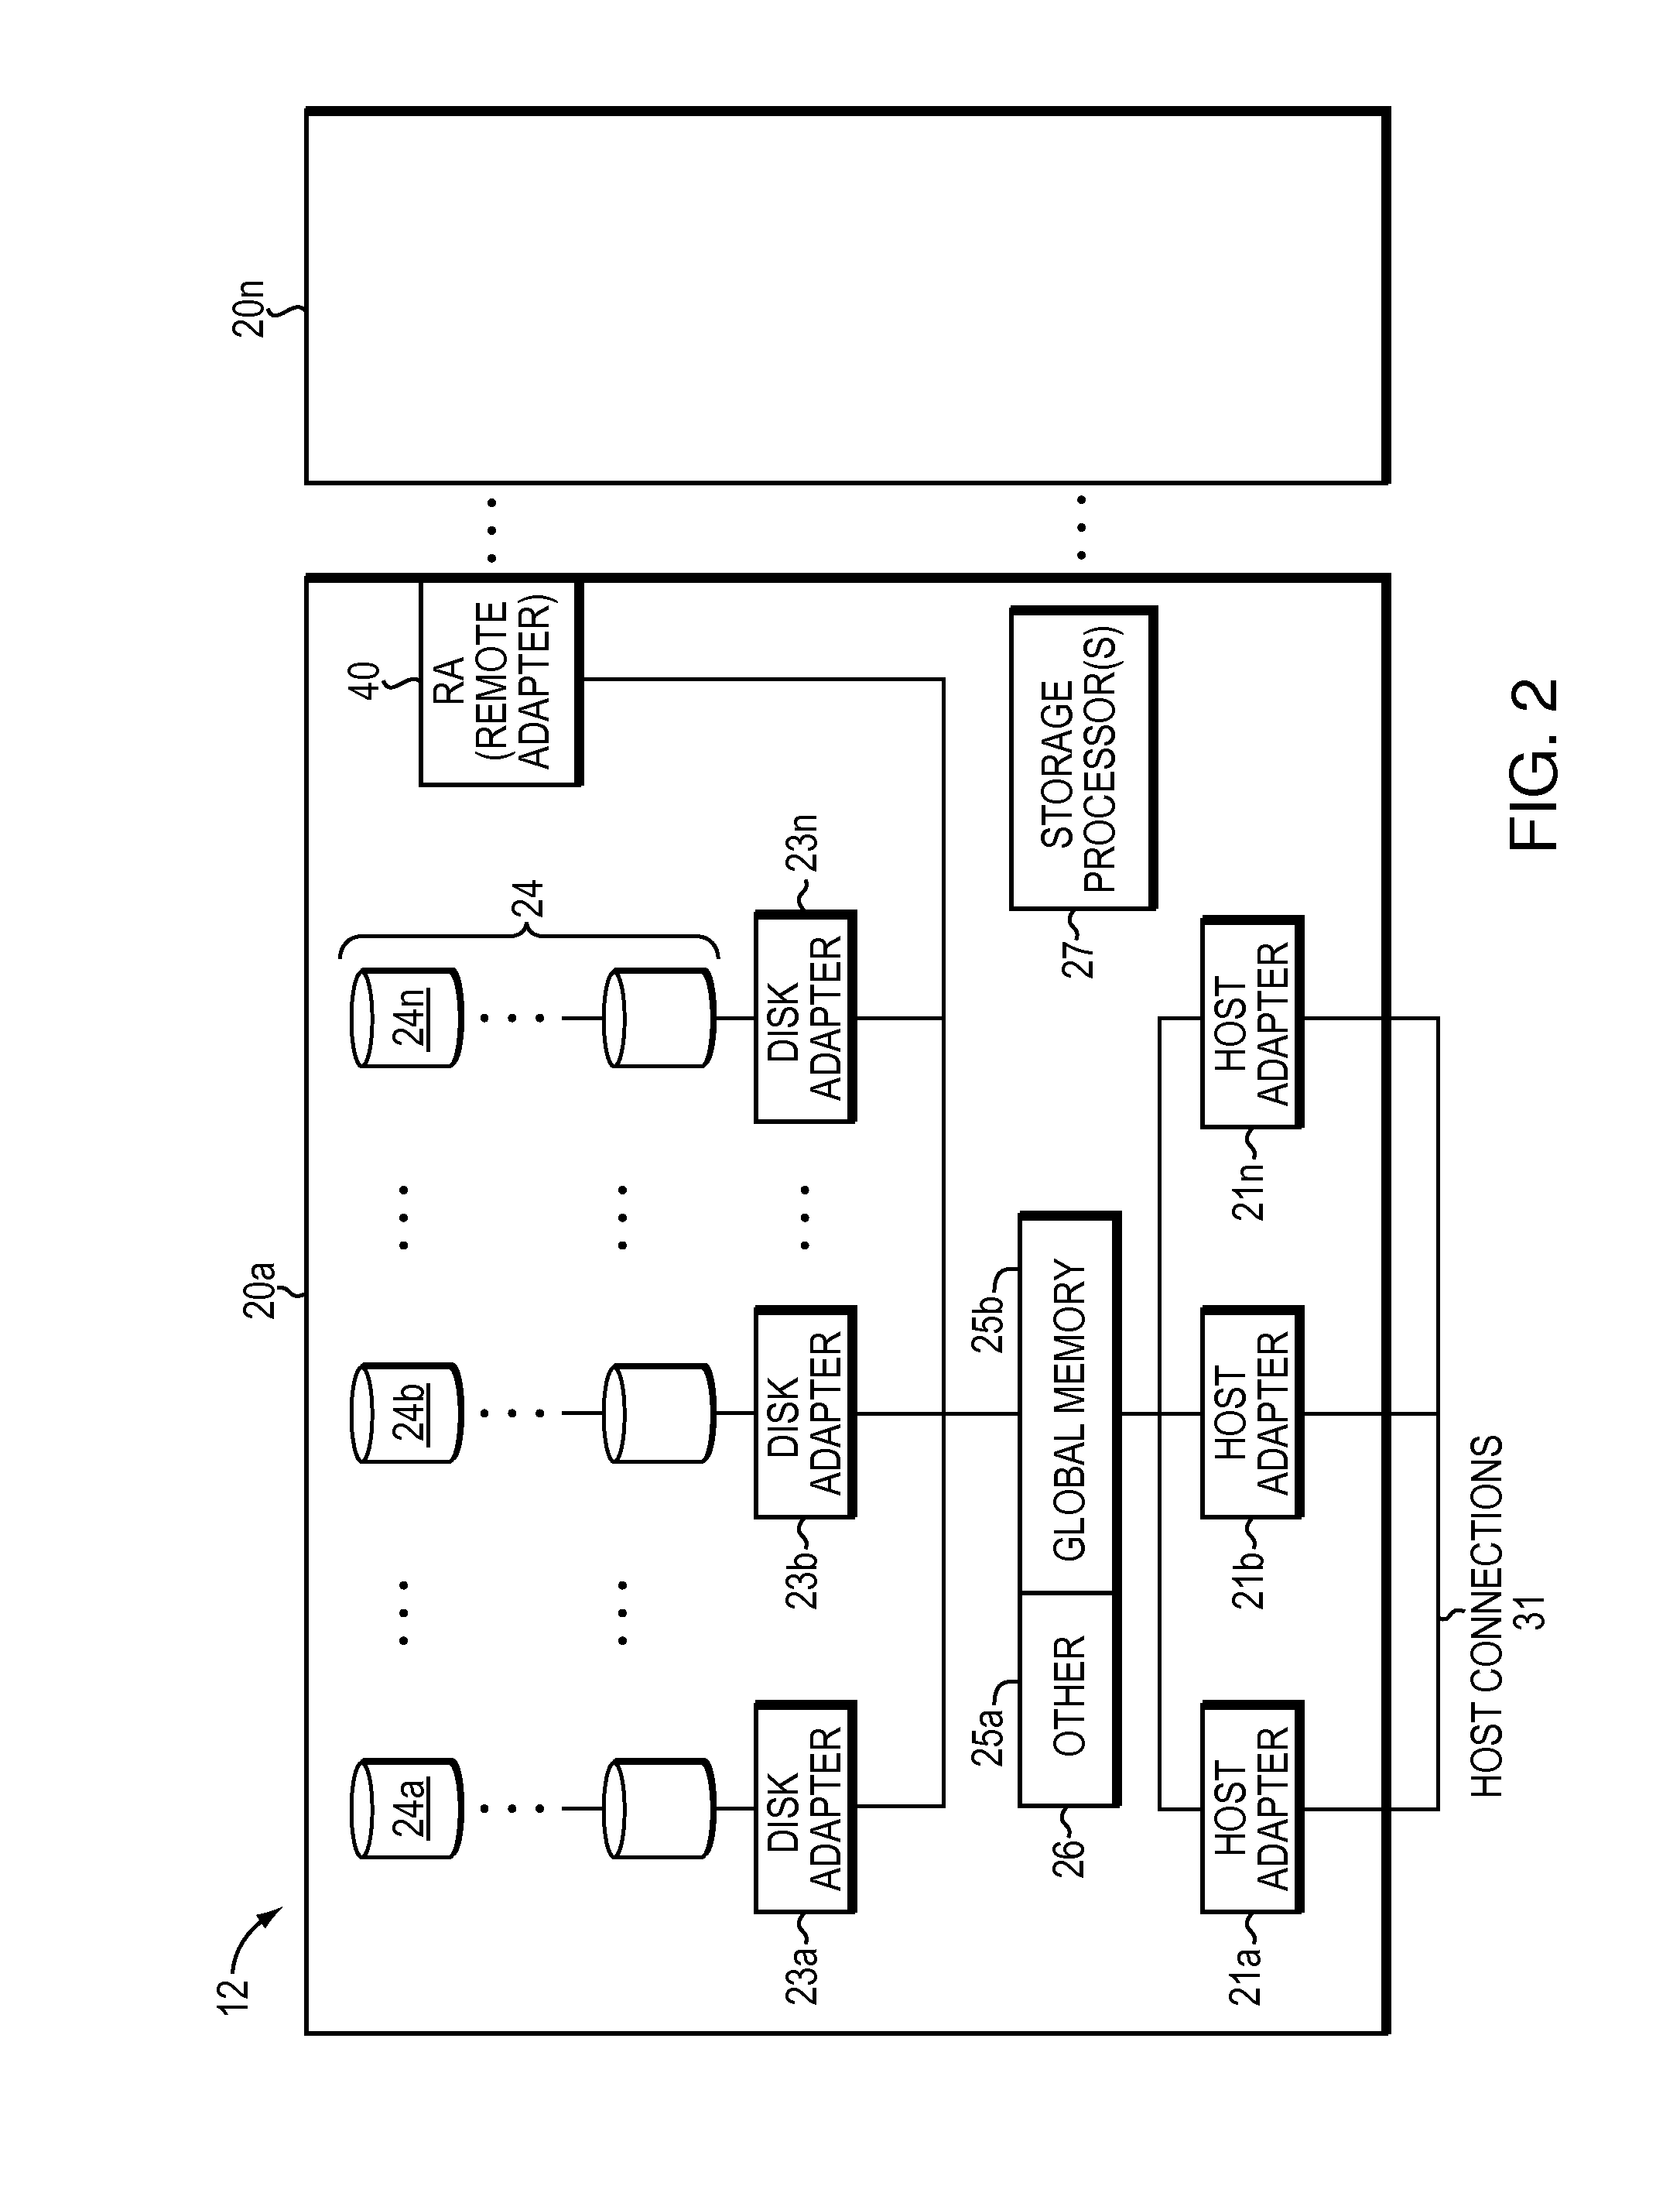 Managing data storage by provisioning cache as a virtual device